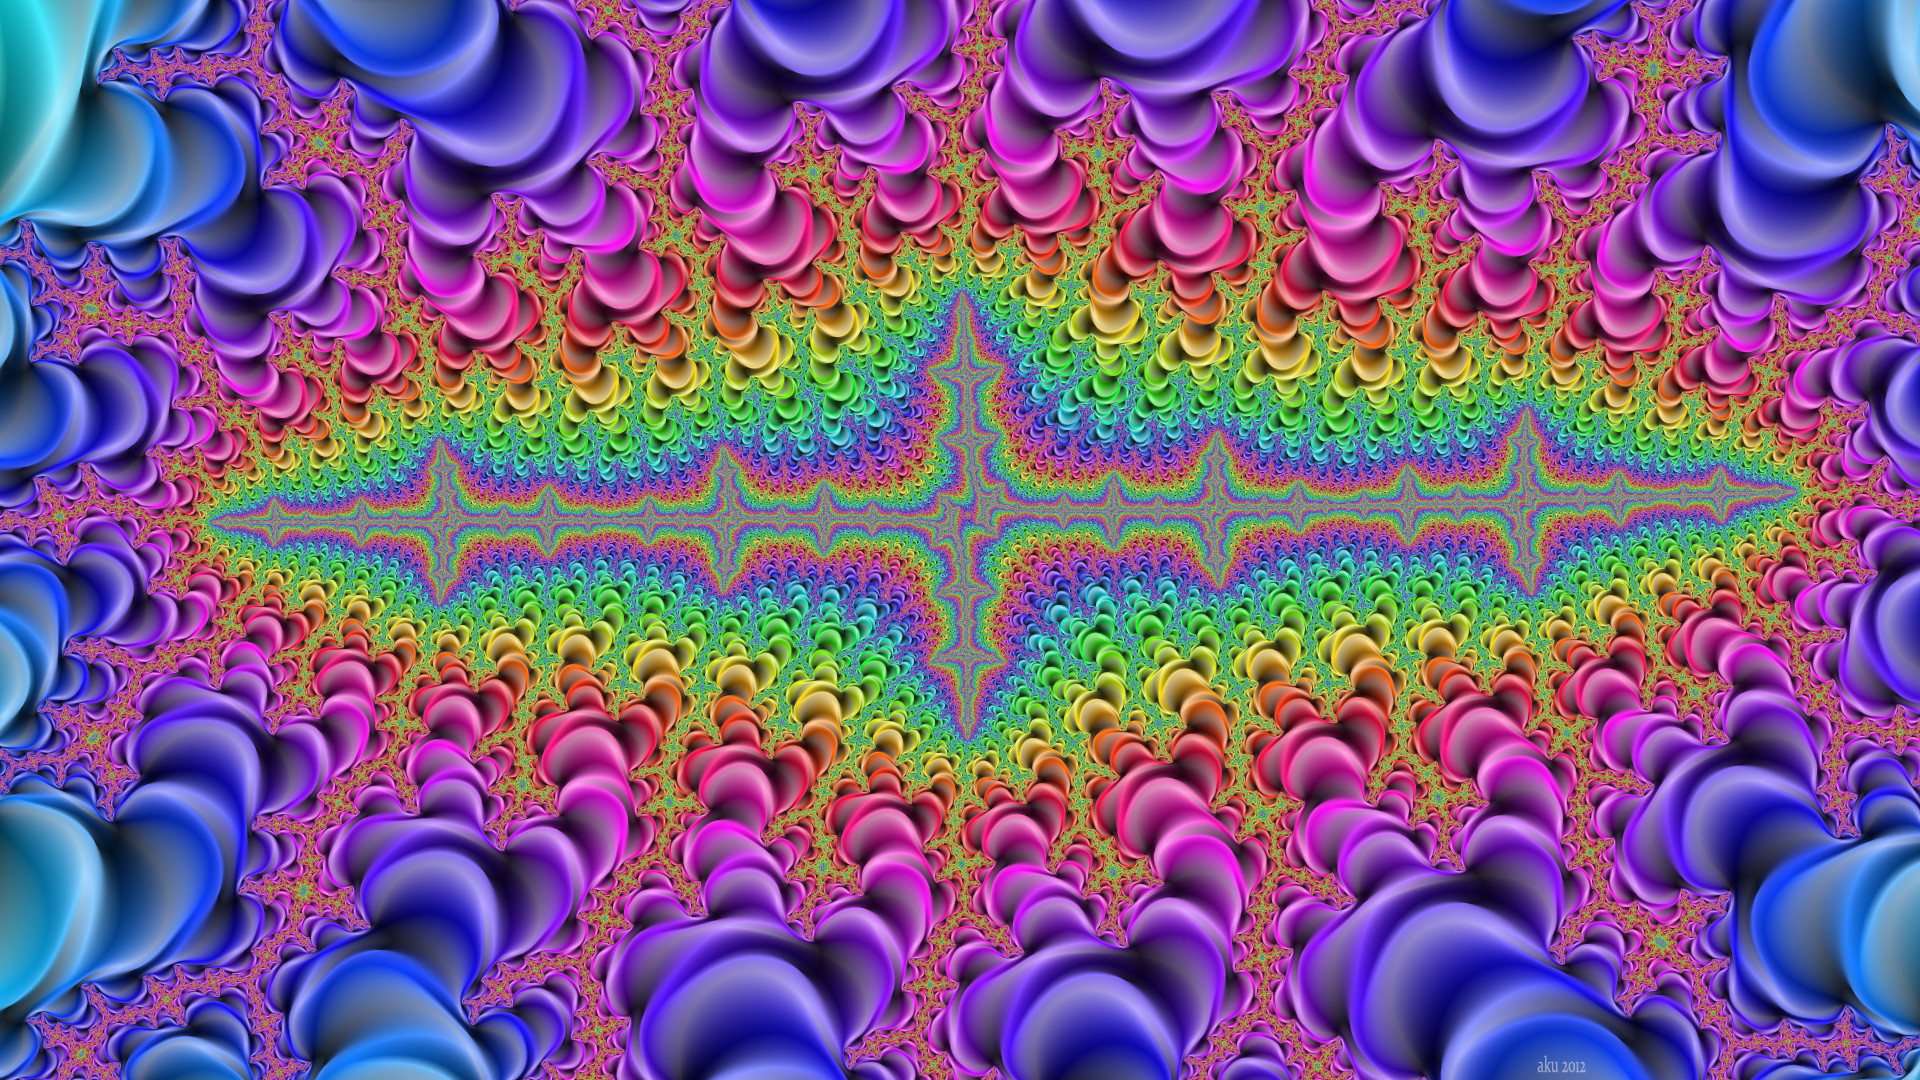 Artistic – Psychedelic Wallpaper